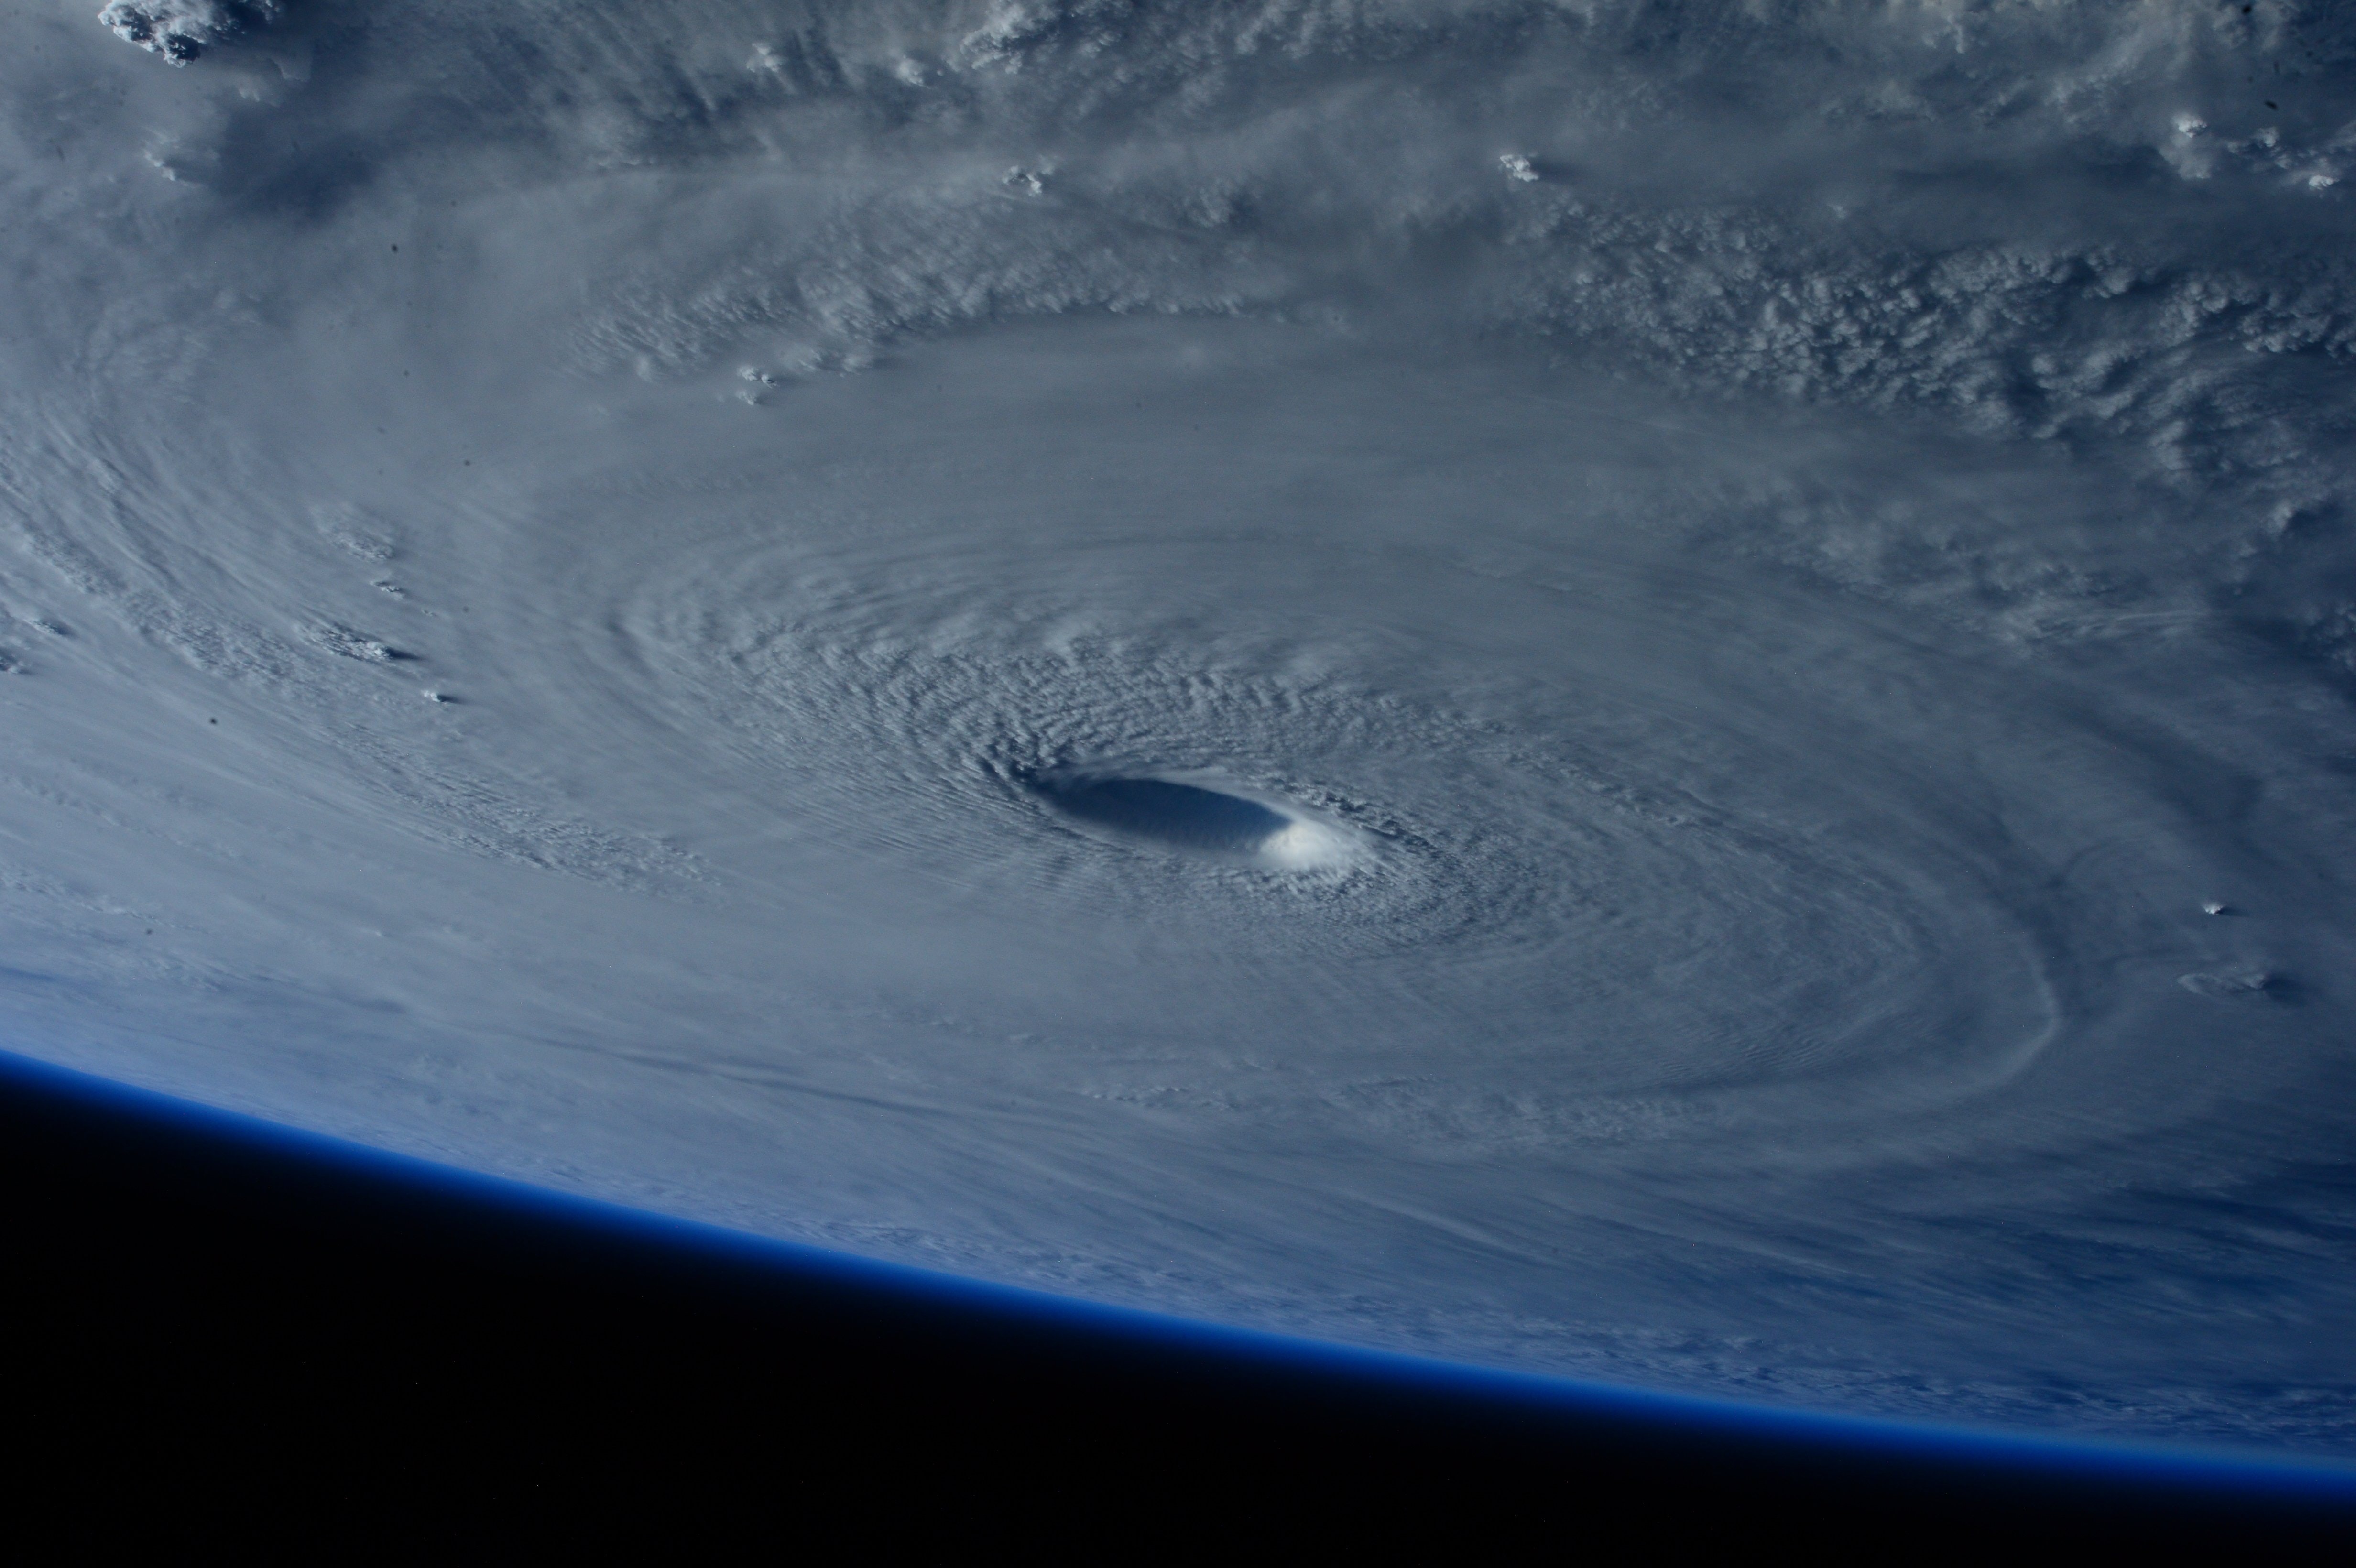 NASA image of hurricane from space